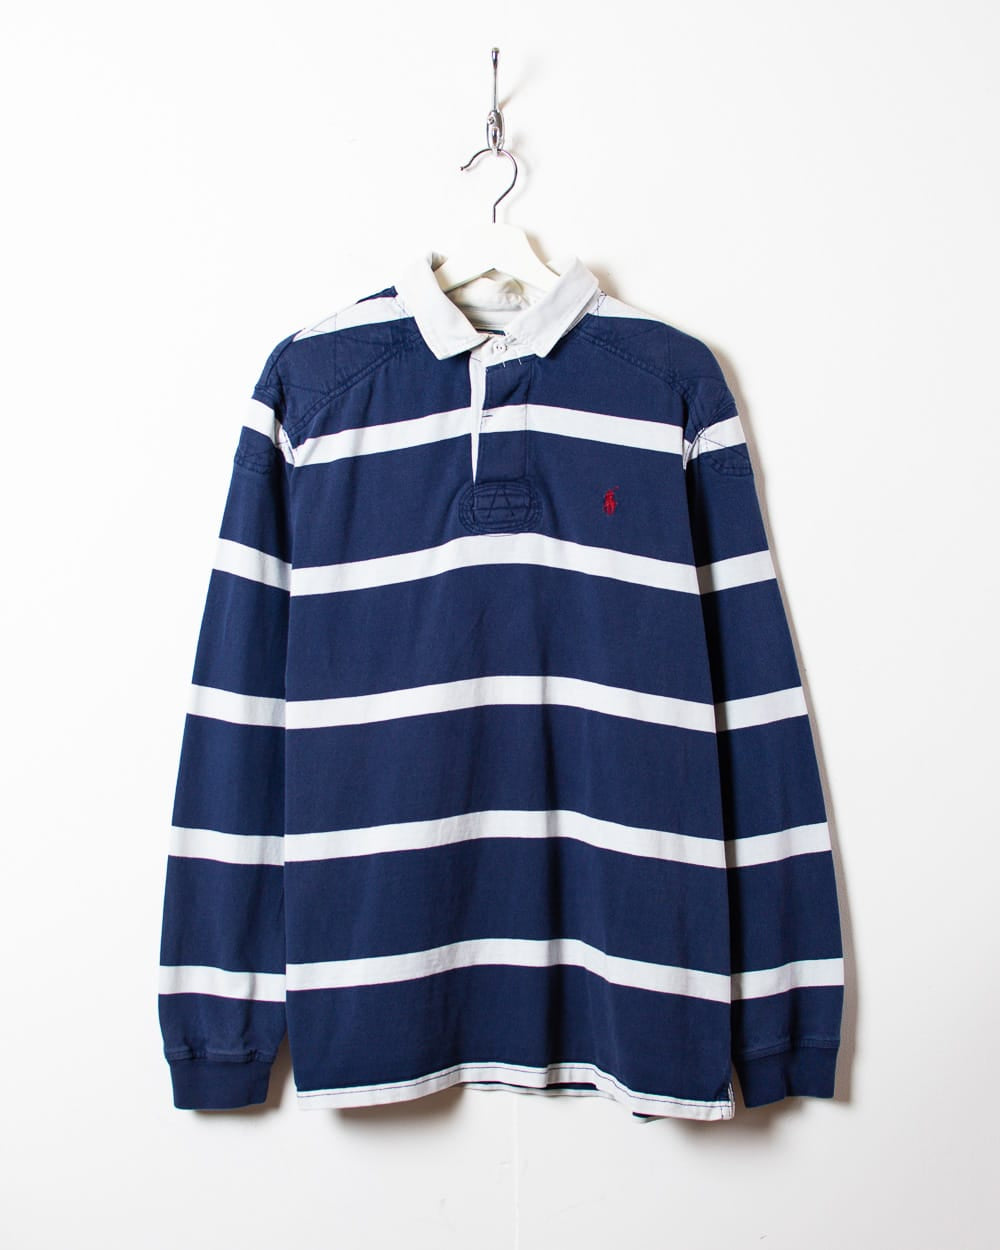 Navy Polo Ralph Lauren Striped Rugby Shirt - X-Large